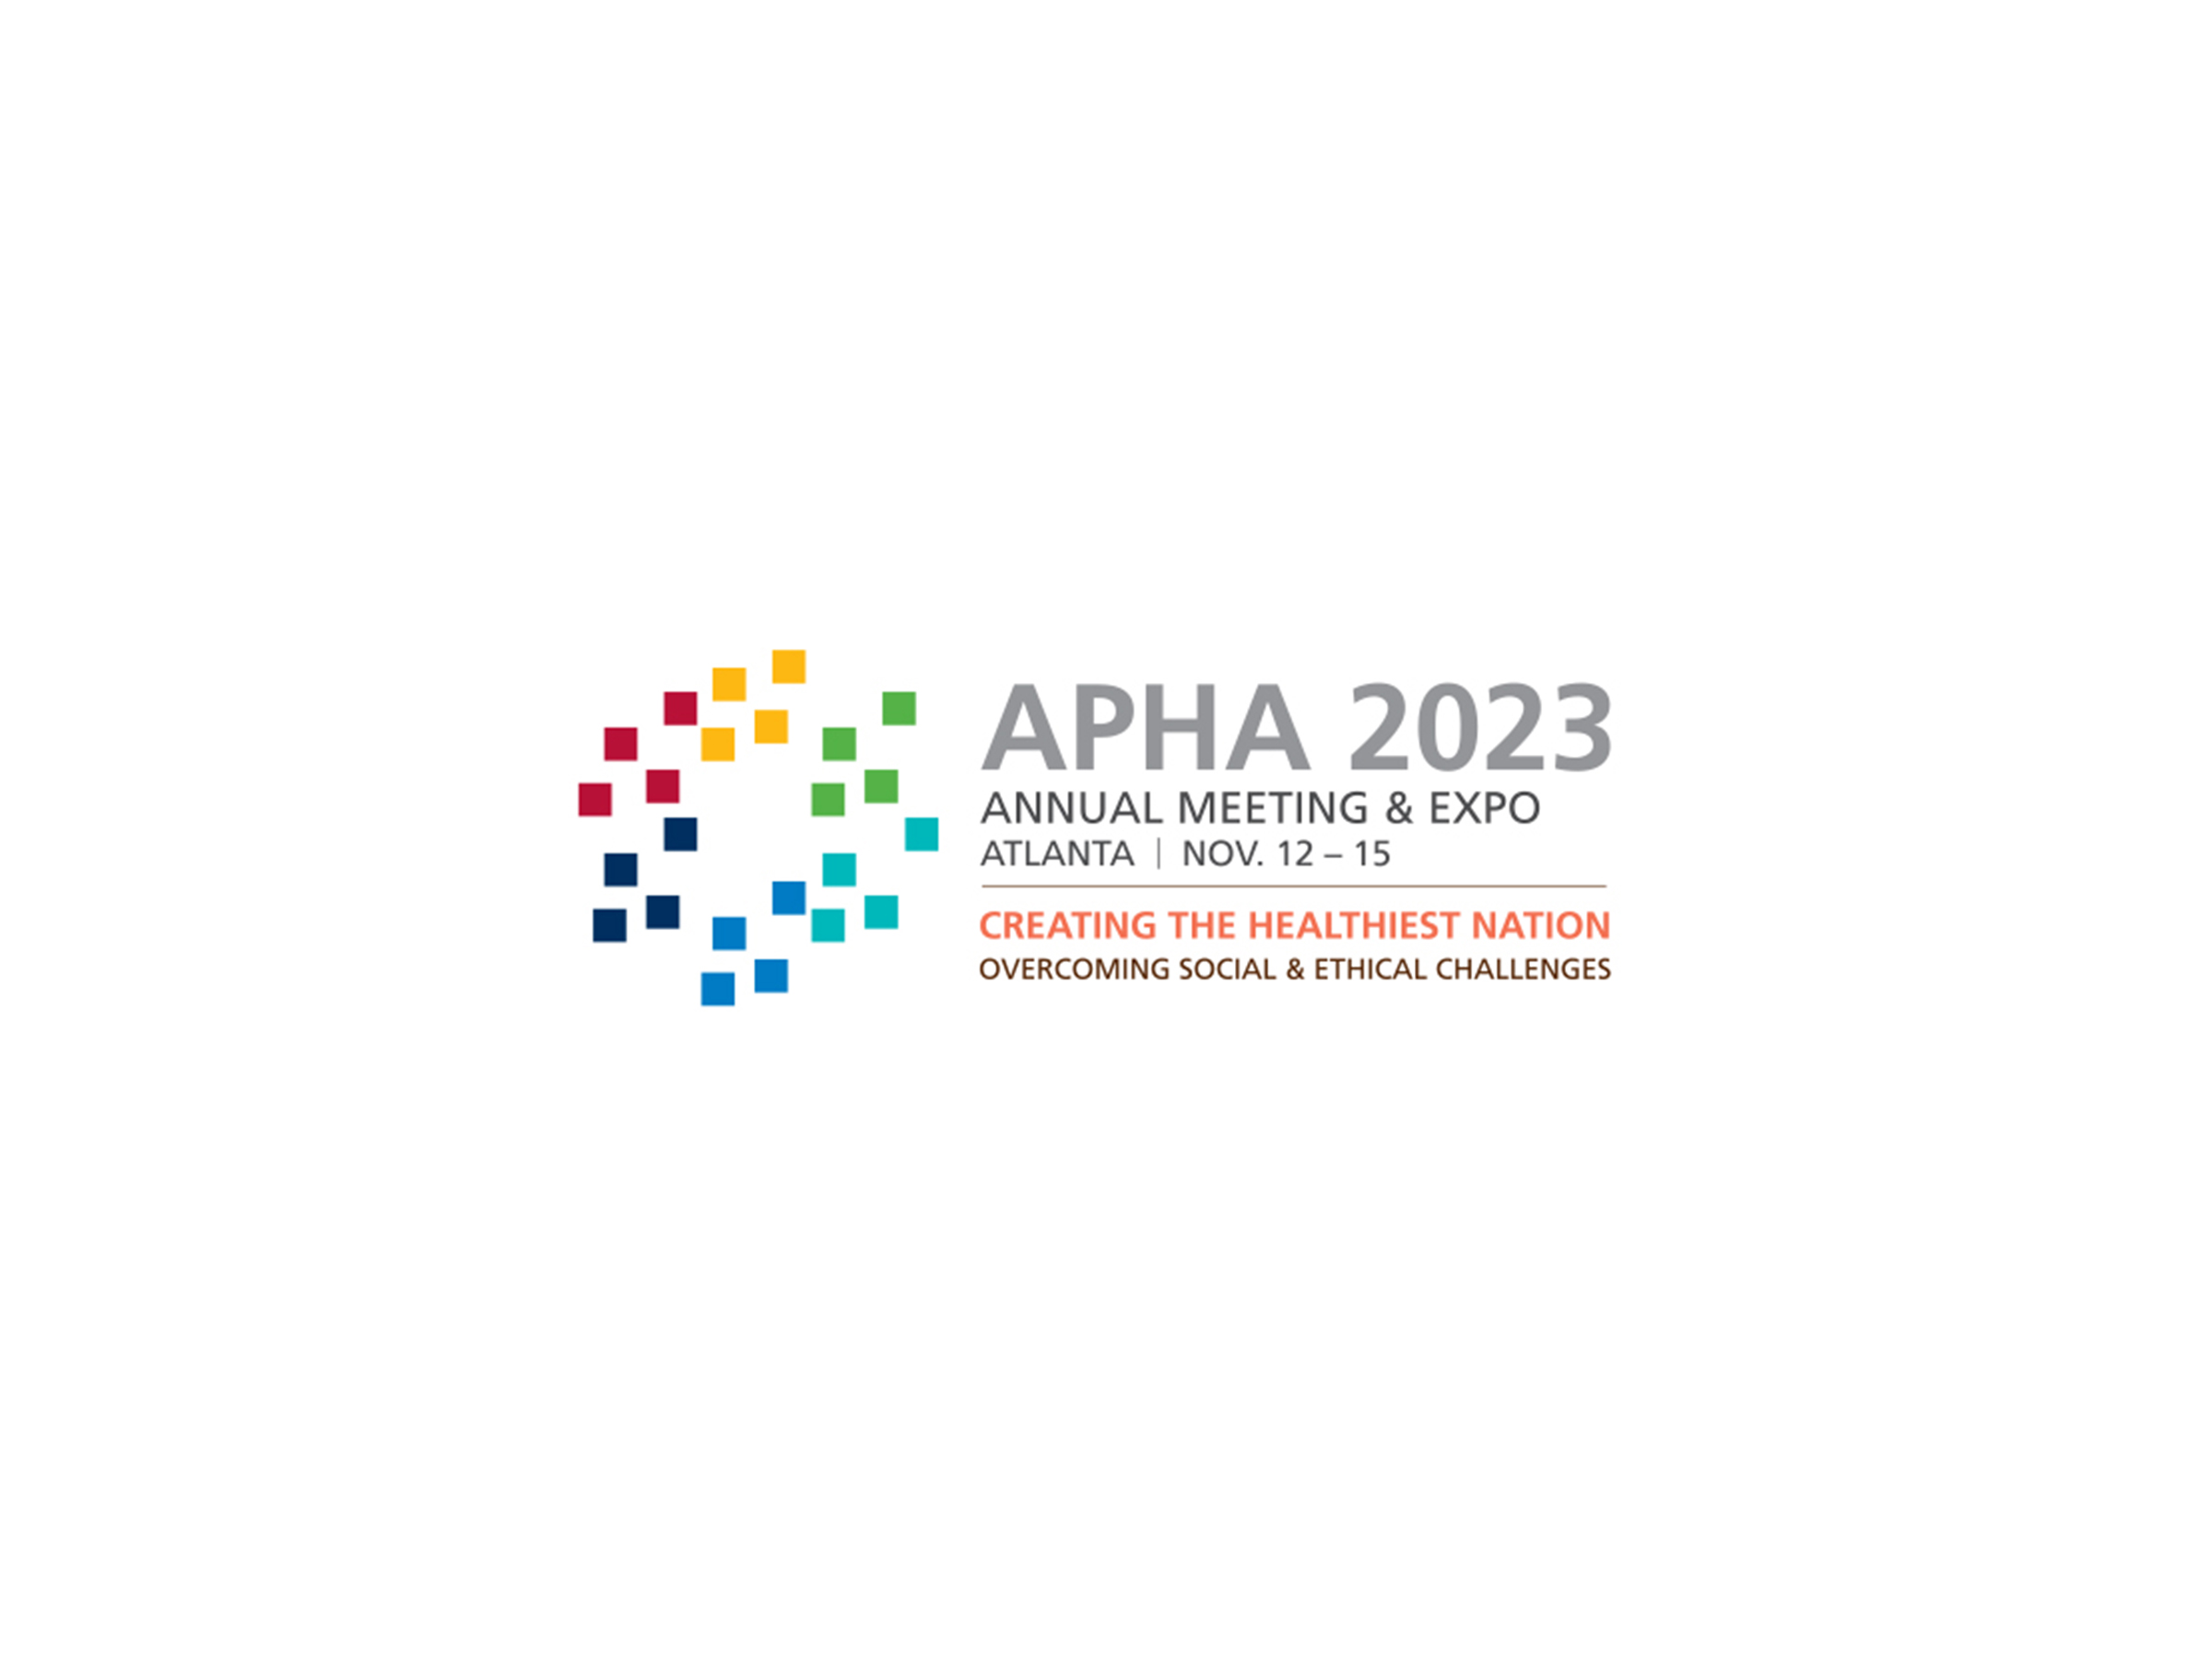 the logo for the APHA 2023 conference with the date and location